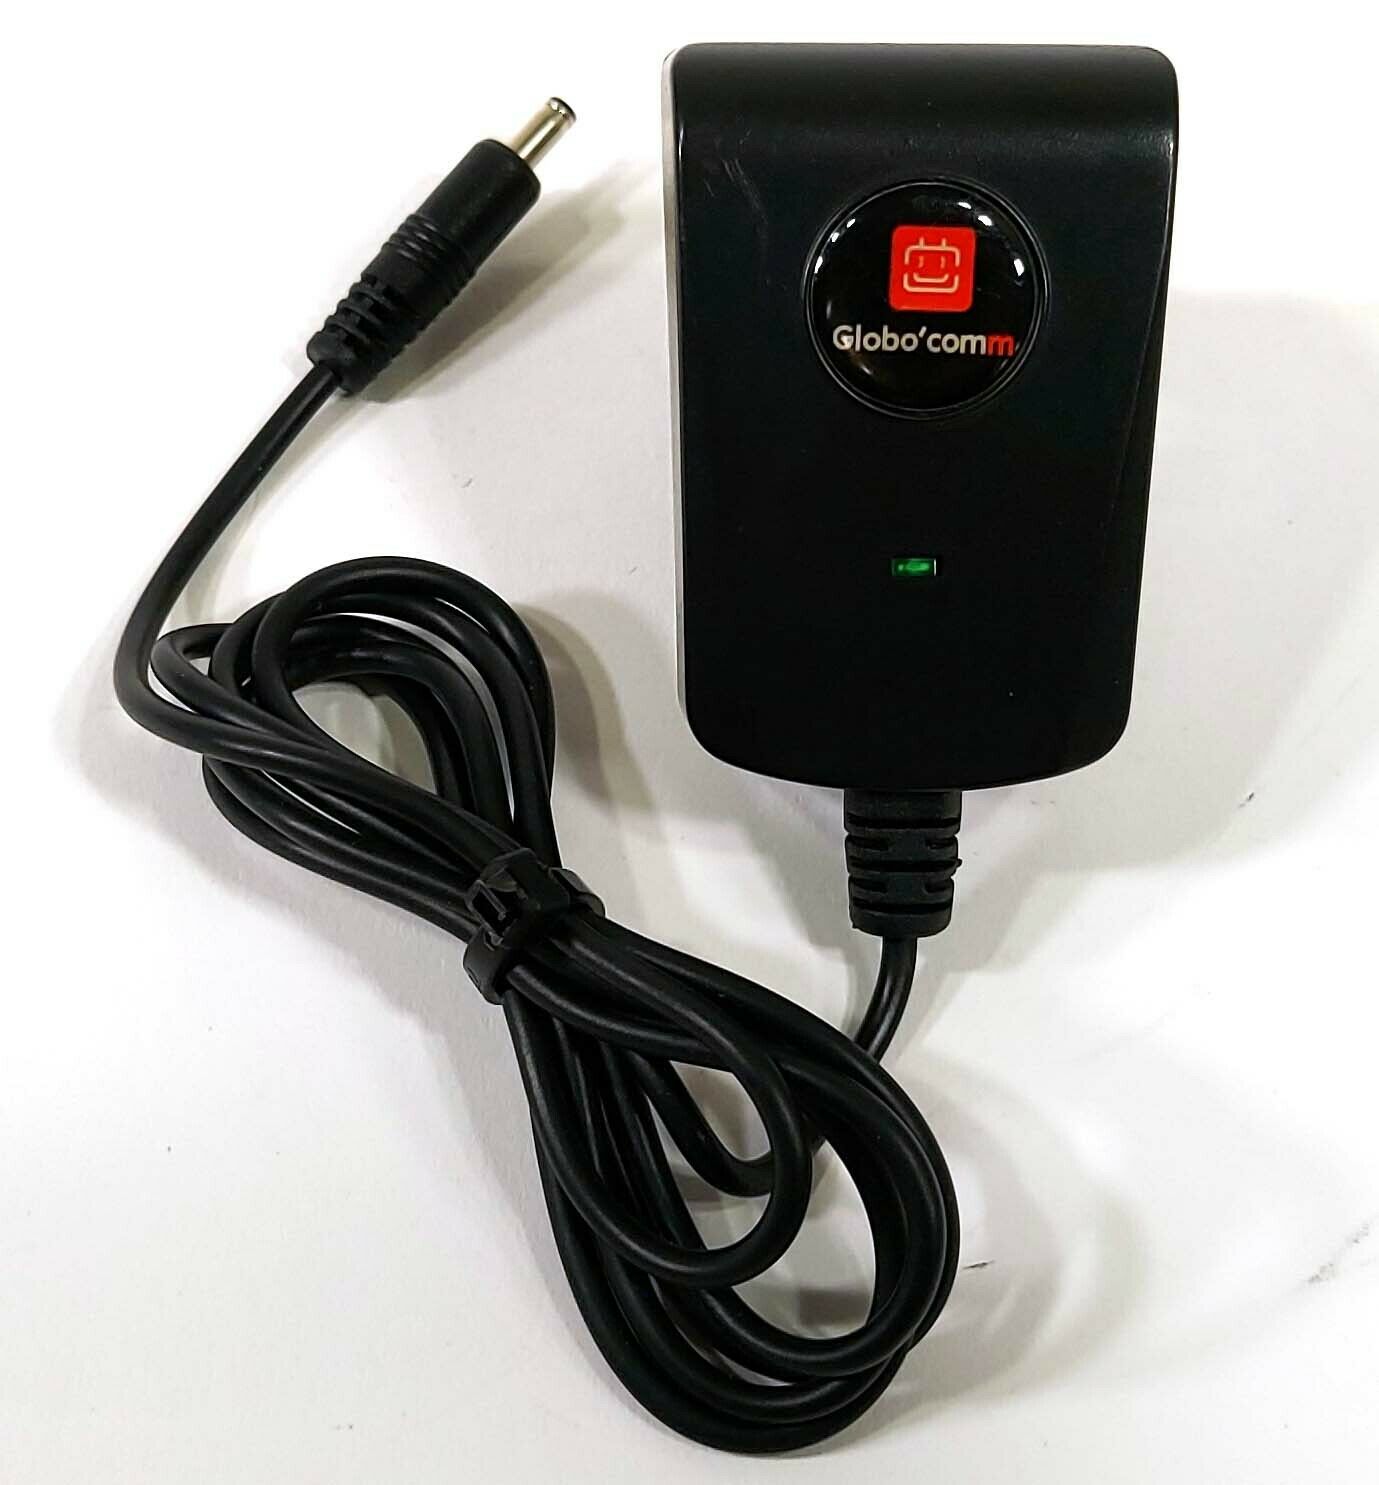 Globo'comm TC5 Travel Charger AC/DC Adapter 5V 400mA Power Supply Output Current: 400 mA Compatible Brand: Universal